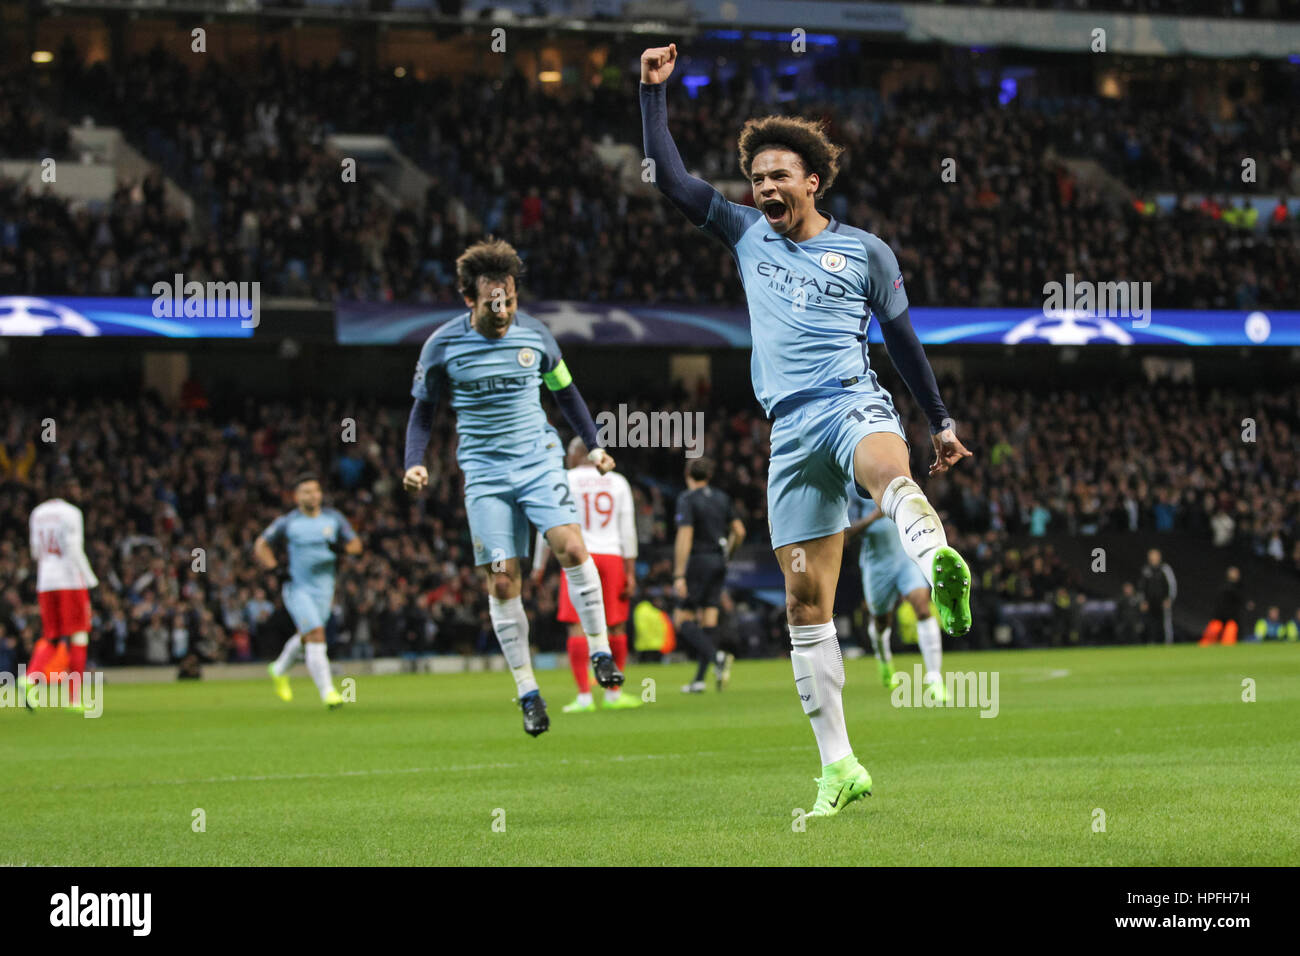 Manchester, UK. 21st Feb, 2017. Leroy Sane of Manchester City celebrates his side's first goal during the UEFA Champions League Round of 16 first leg match between Manchester City and AS Monaco at the Etihad Stadium on February 21st 2017 in Manchester, England. Credit: PHC Images/Alamy Live News Stock Photo